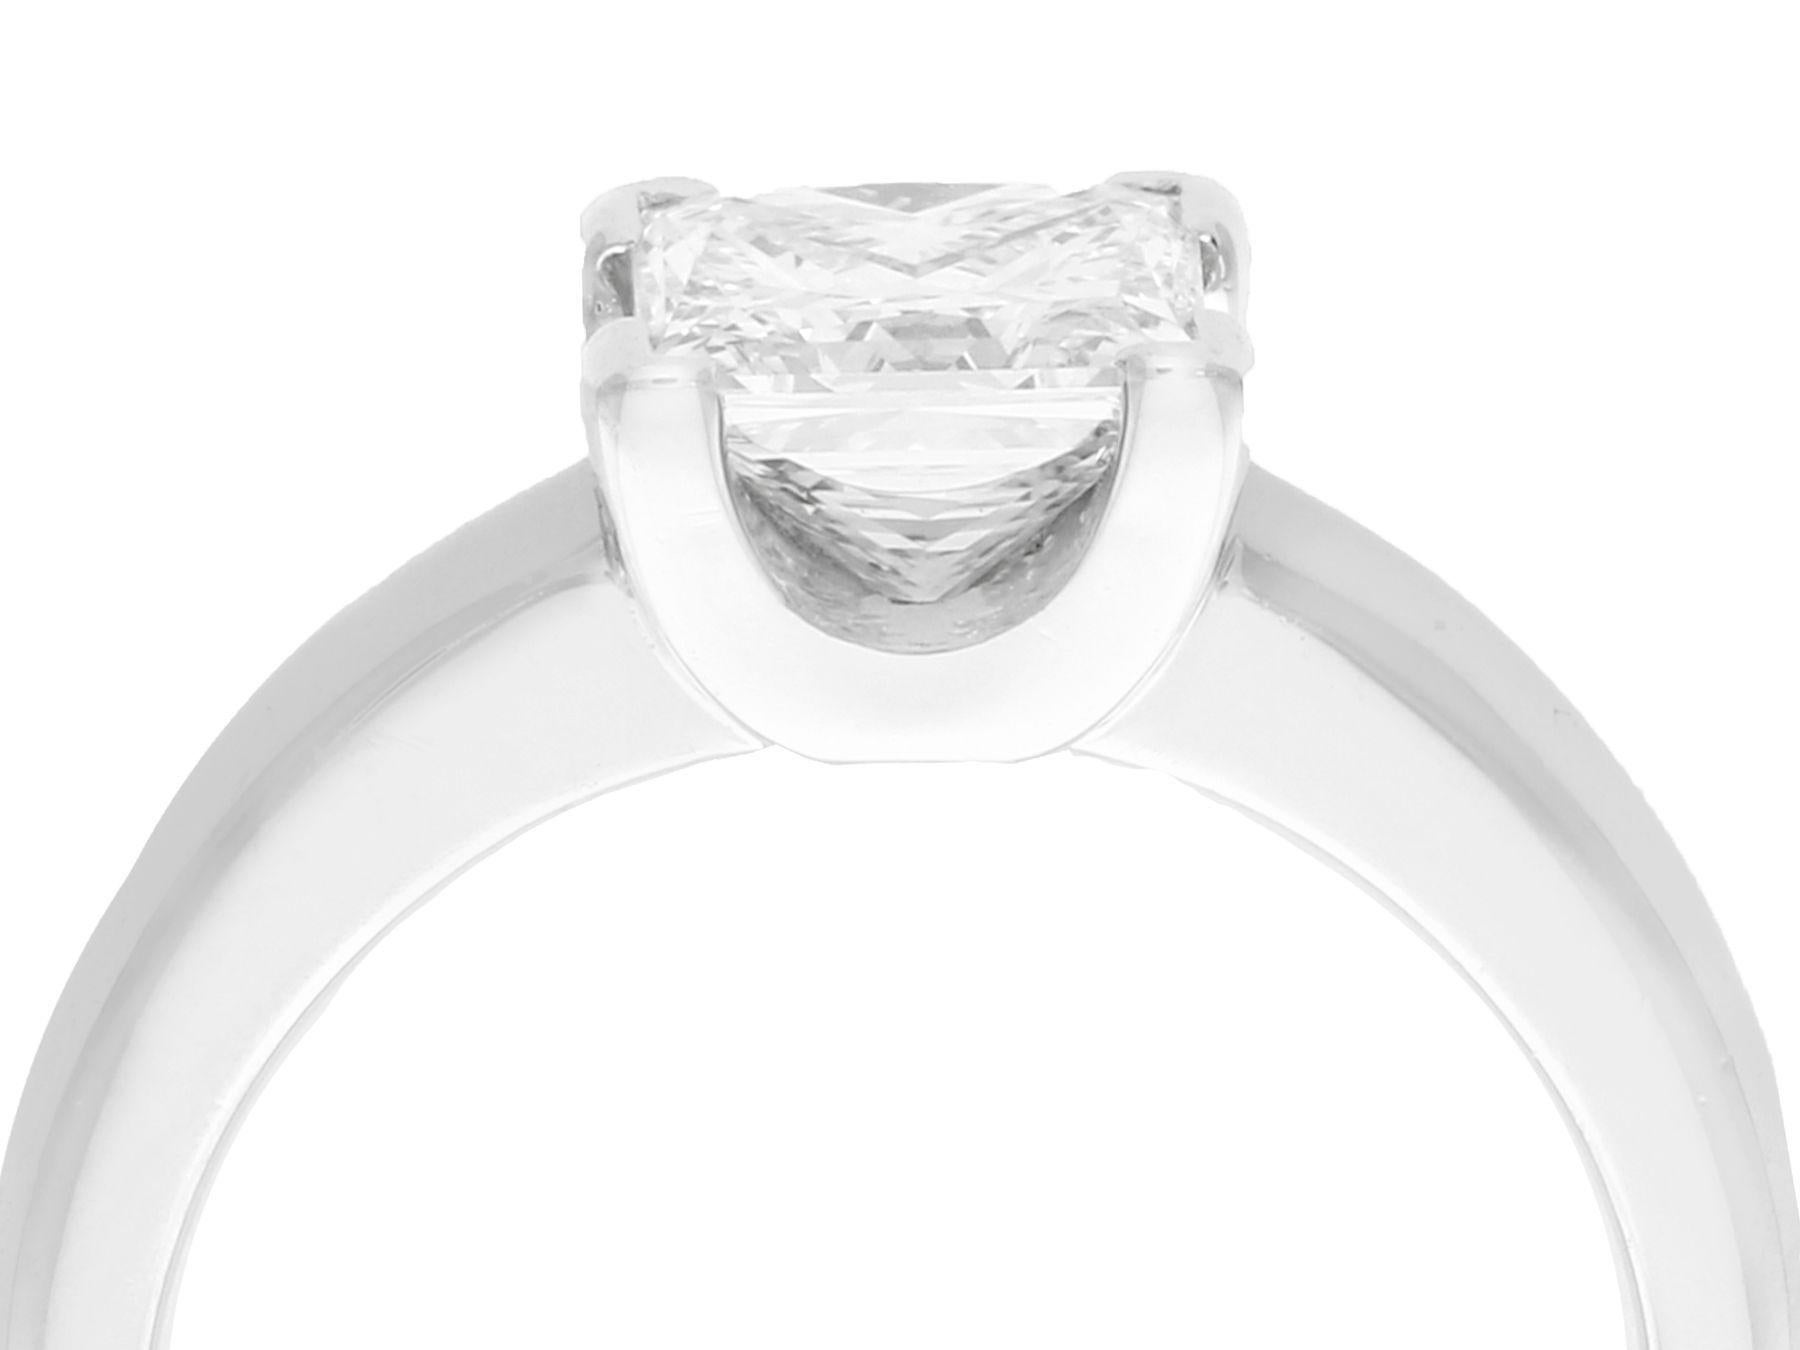 A stunning, fine and impressive 1.52 carat diamond engagement ring in platinum; part of our diverse range of diamond engagement rings.

This stunning, fine and impressive contemporary princess cut engagement ring has been crafted in platinum.

The